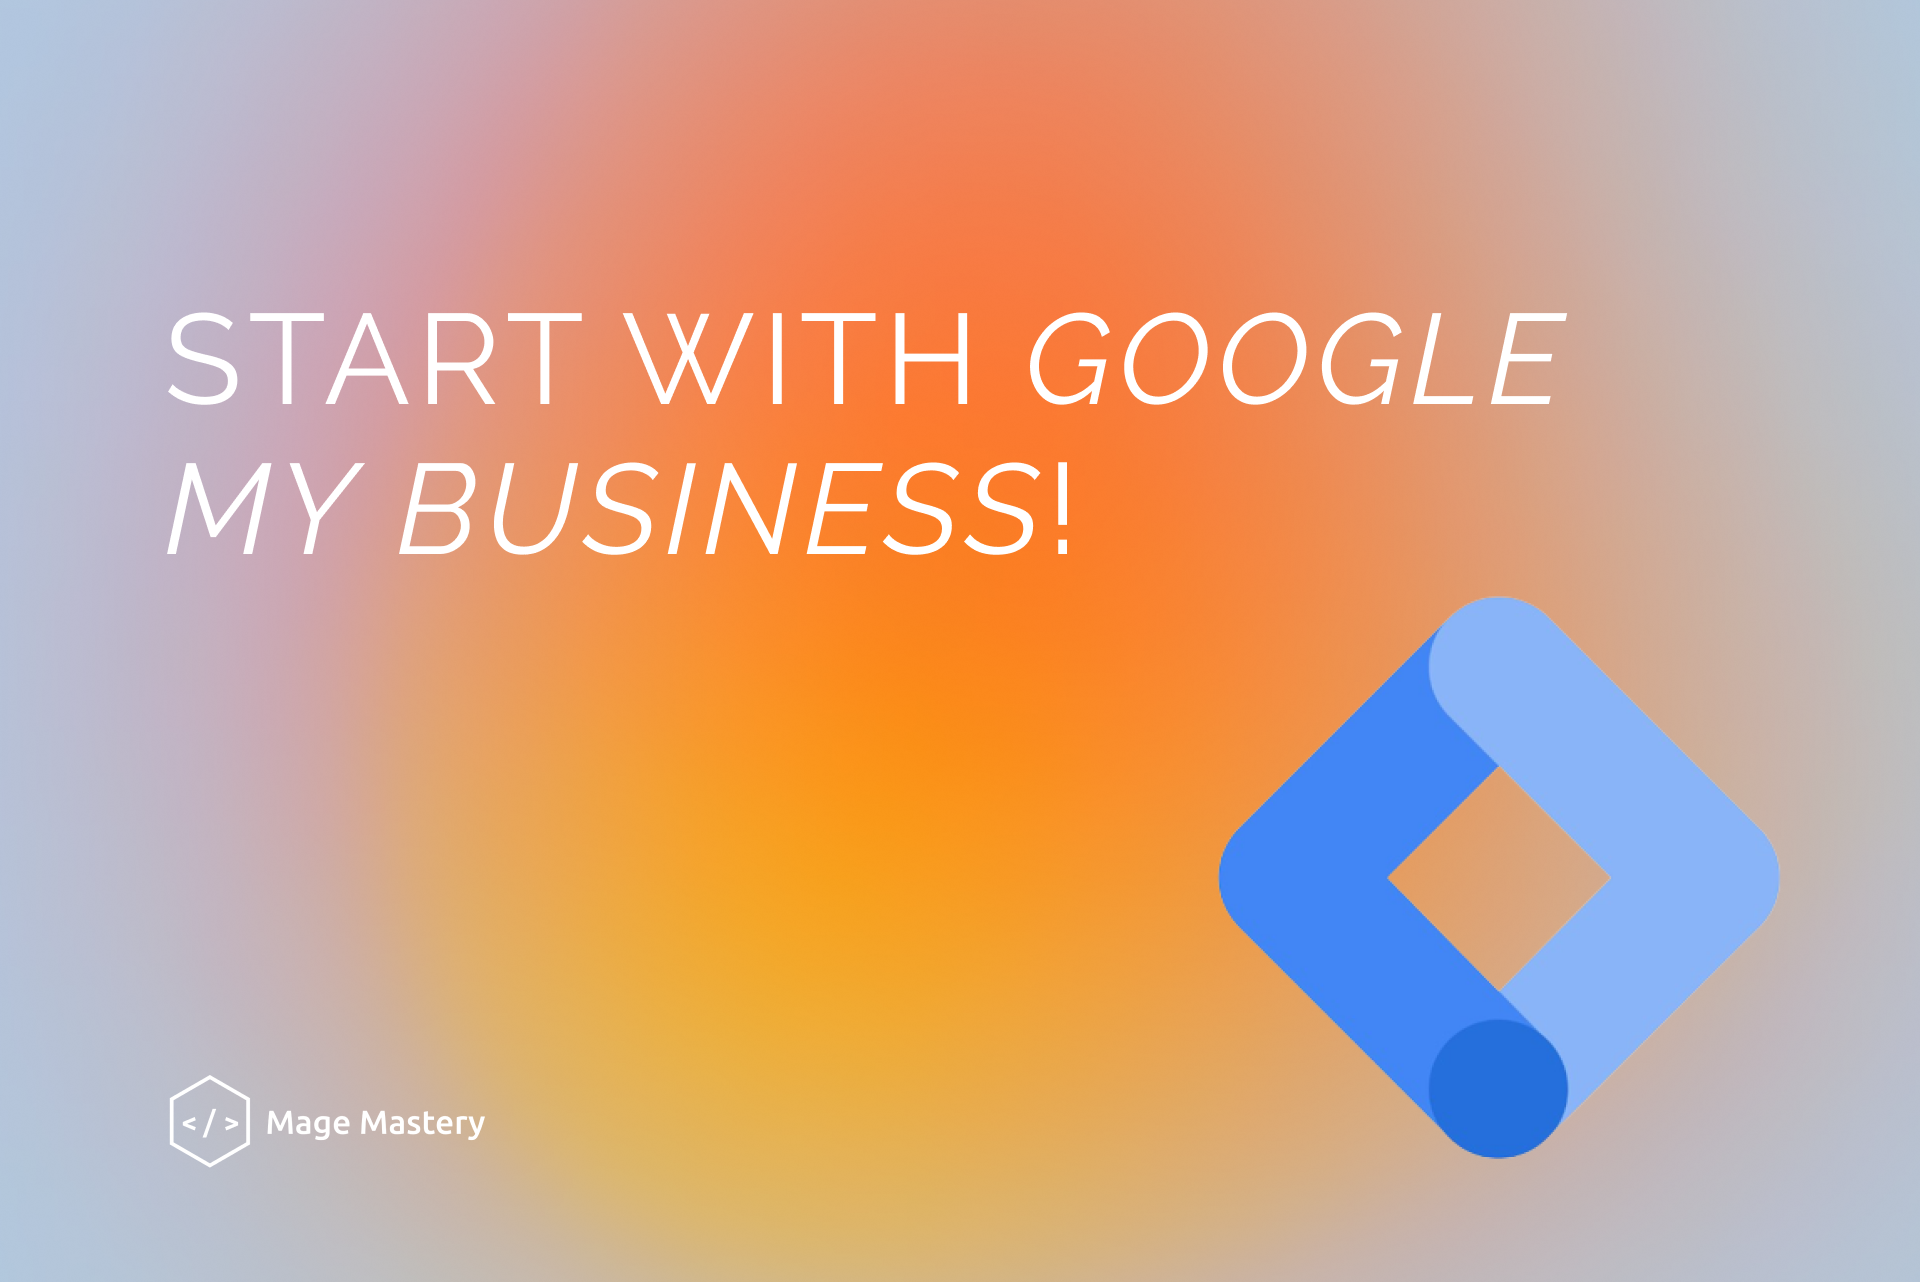 What is Google My Business, and how to use it?